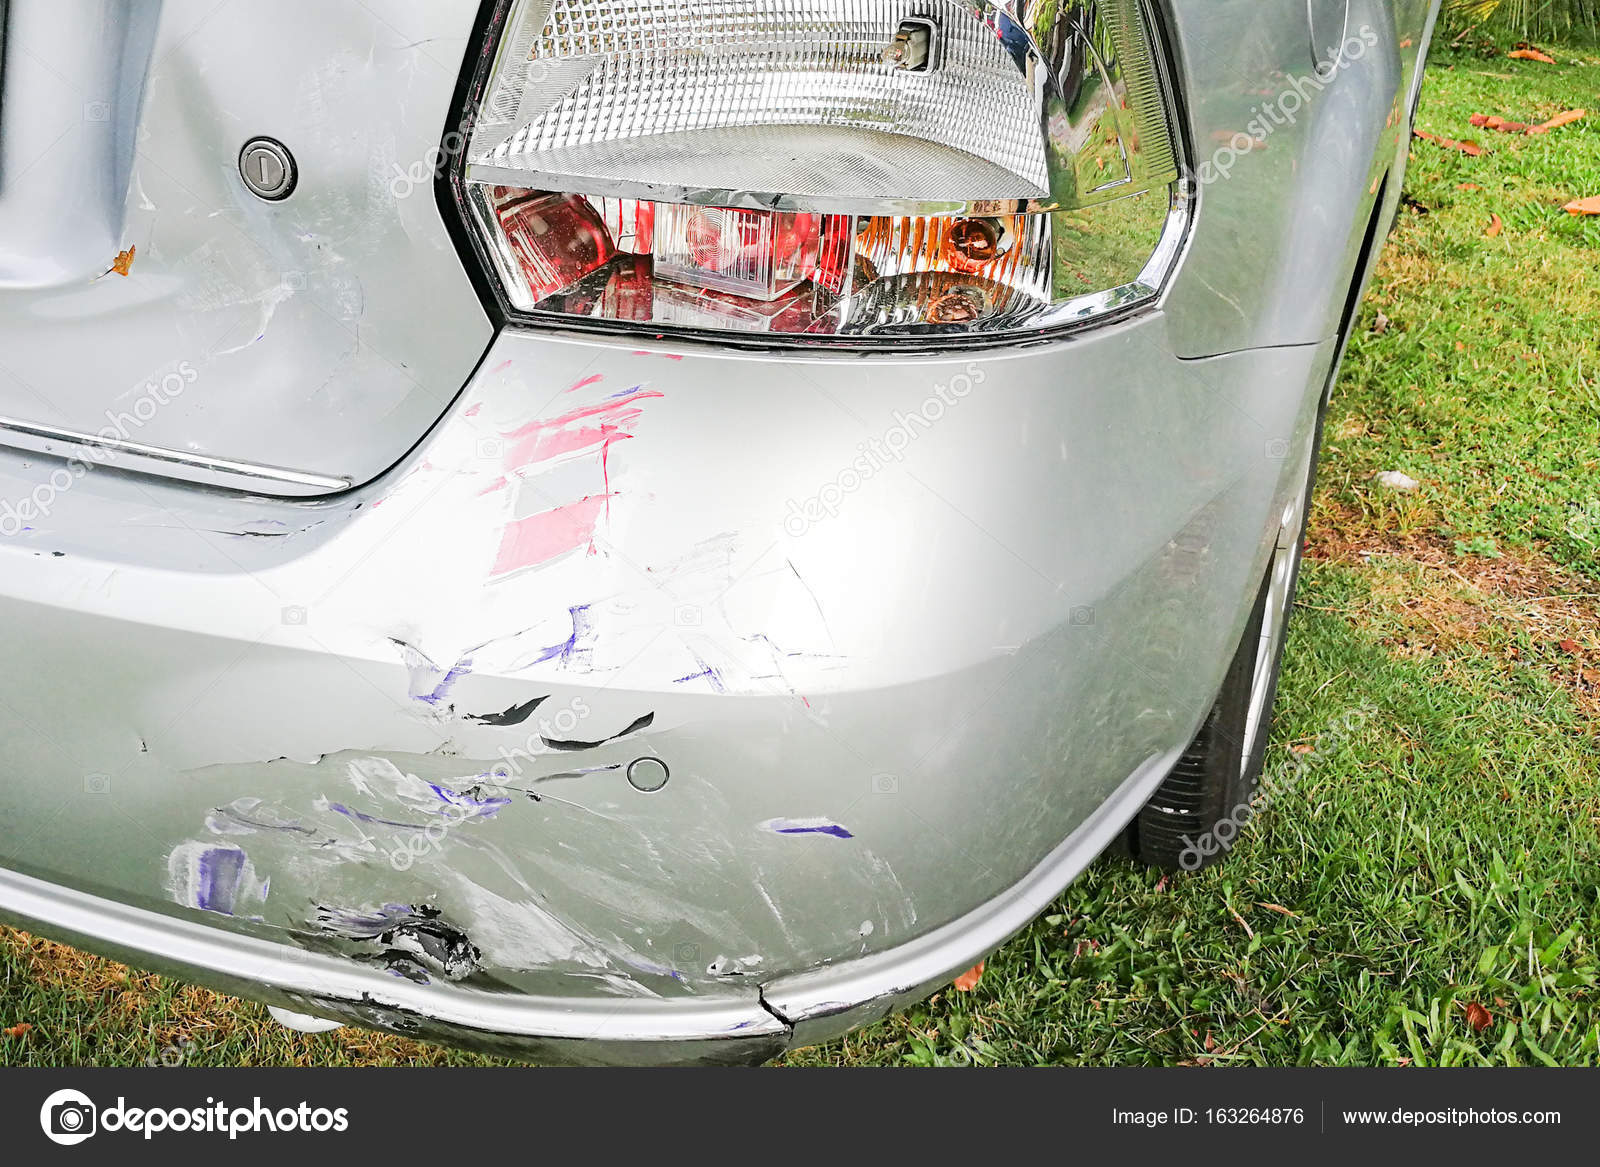 Download - Minor dent and scratches on bumper of car involved in accident -...